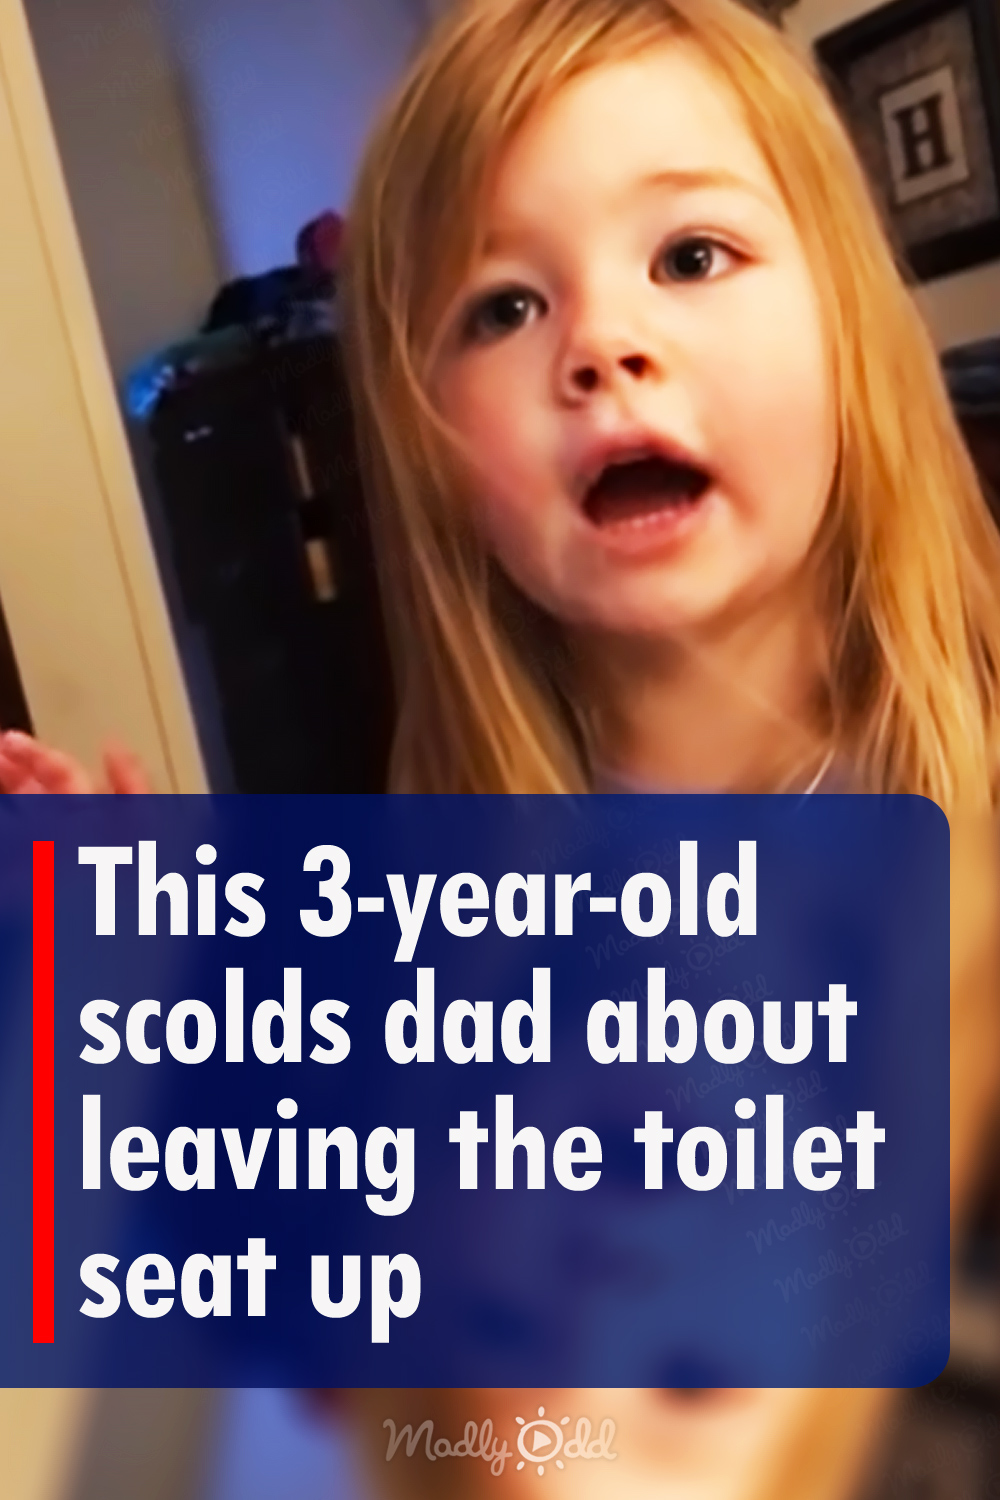 This 3-year-old scolds dad about leaving the toilet seat up